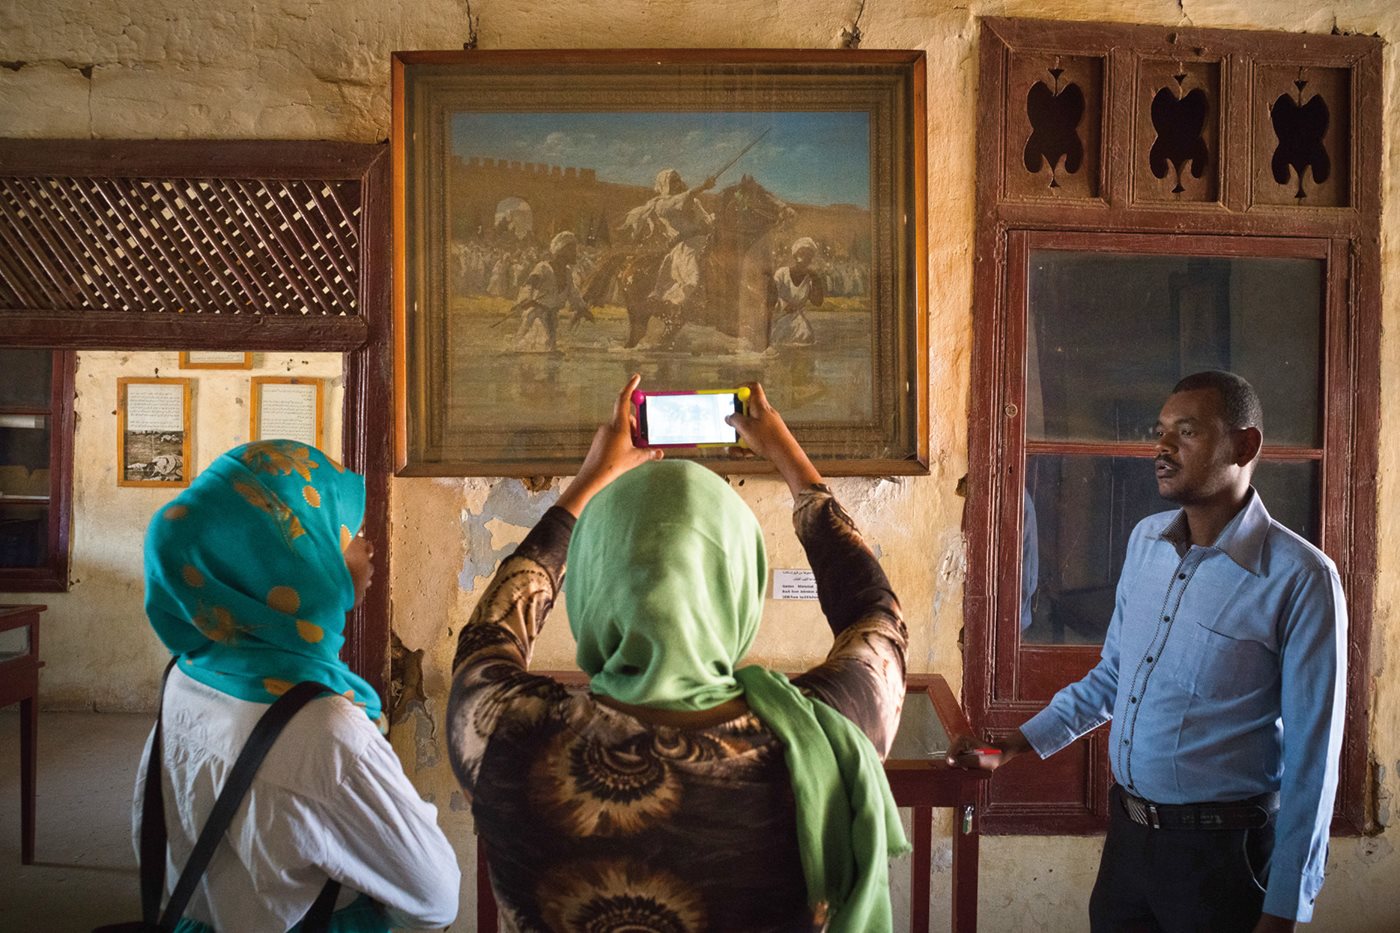 Visitors view a battle scene at the Khalifa House Museum in Omdurman, which became the capital after Sudanese forces under Muhammad Ahmad ibn al-Sayyid defeated Anglo-Egyptian troops in 1885. In 1898 the British recaptured Omdurman from Adullahi ibn Muhammad, whose house is the site of the museum. Independence came to Sudan in 1956.